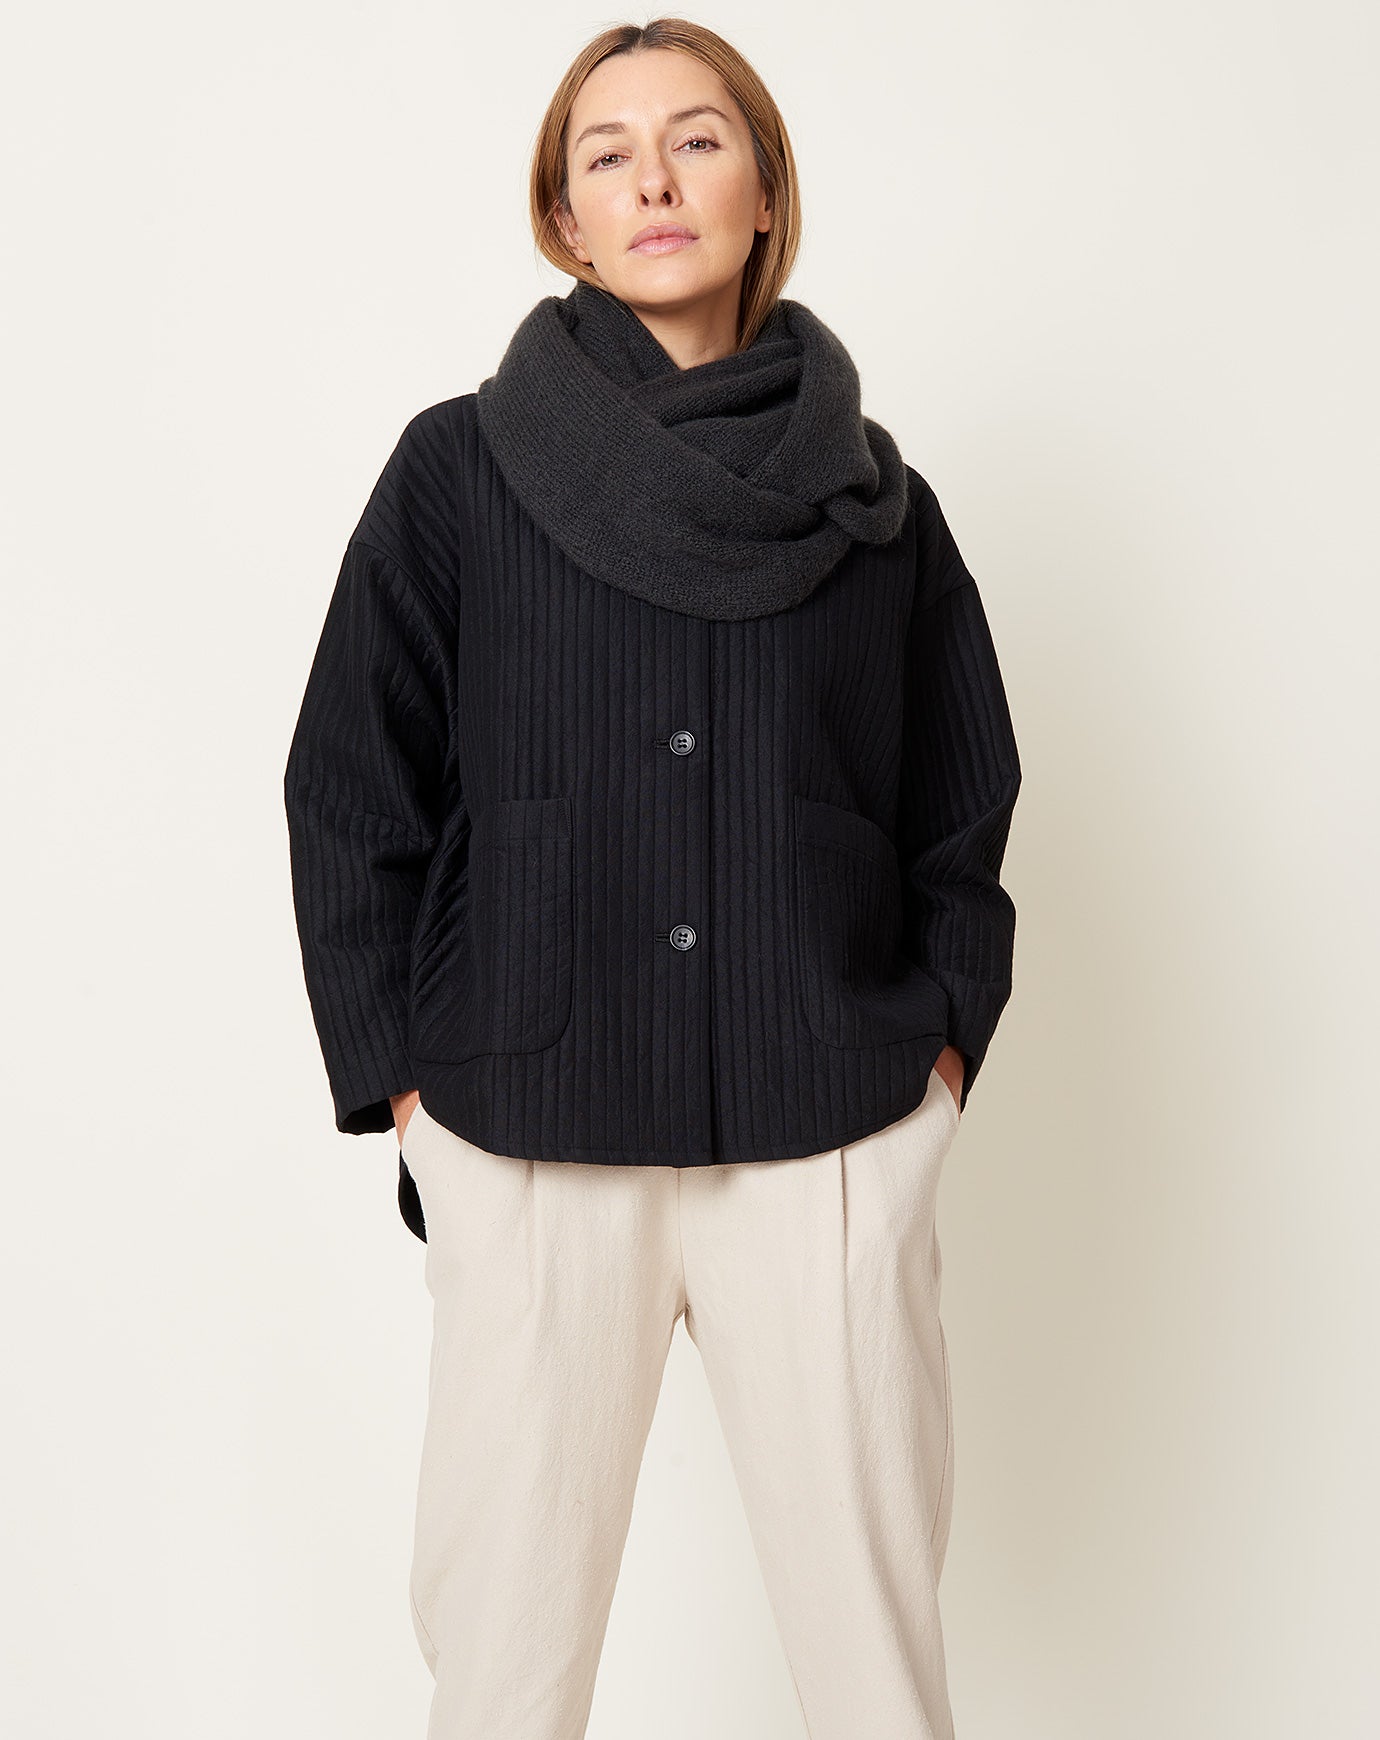 40% off] evam eva Wool Pullover - Mocha – Out & About